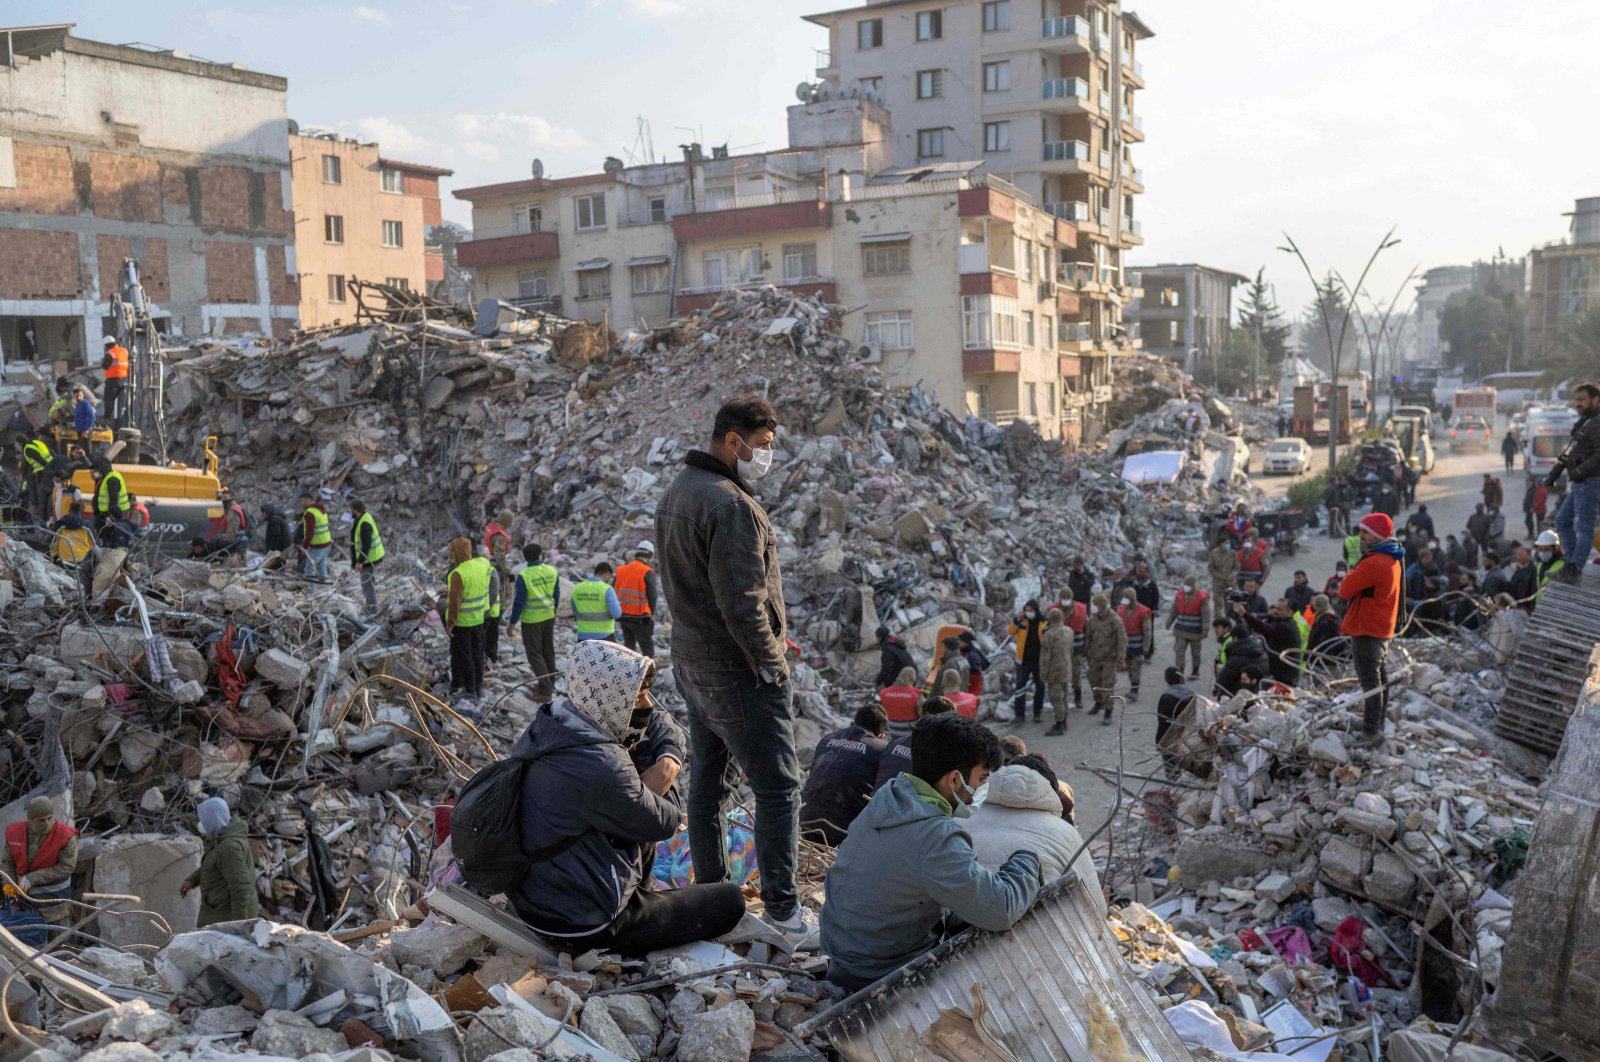 People stand on top of the rubble from collapsed buildings during rescue operations, in Hatay, Türkiye, Feb. 12, 2023. (AFP Photo)